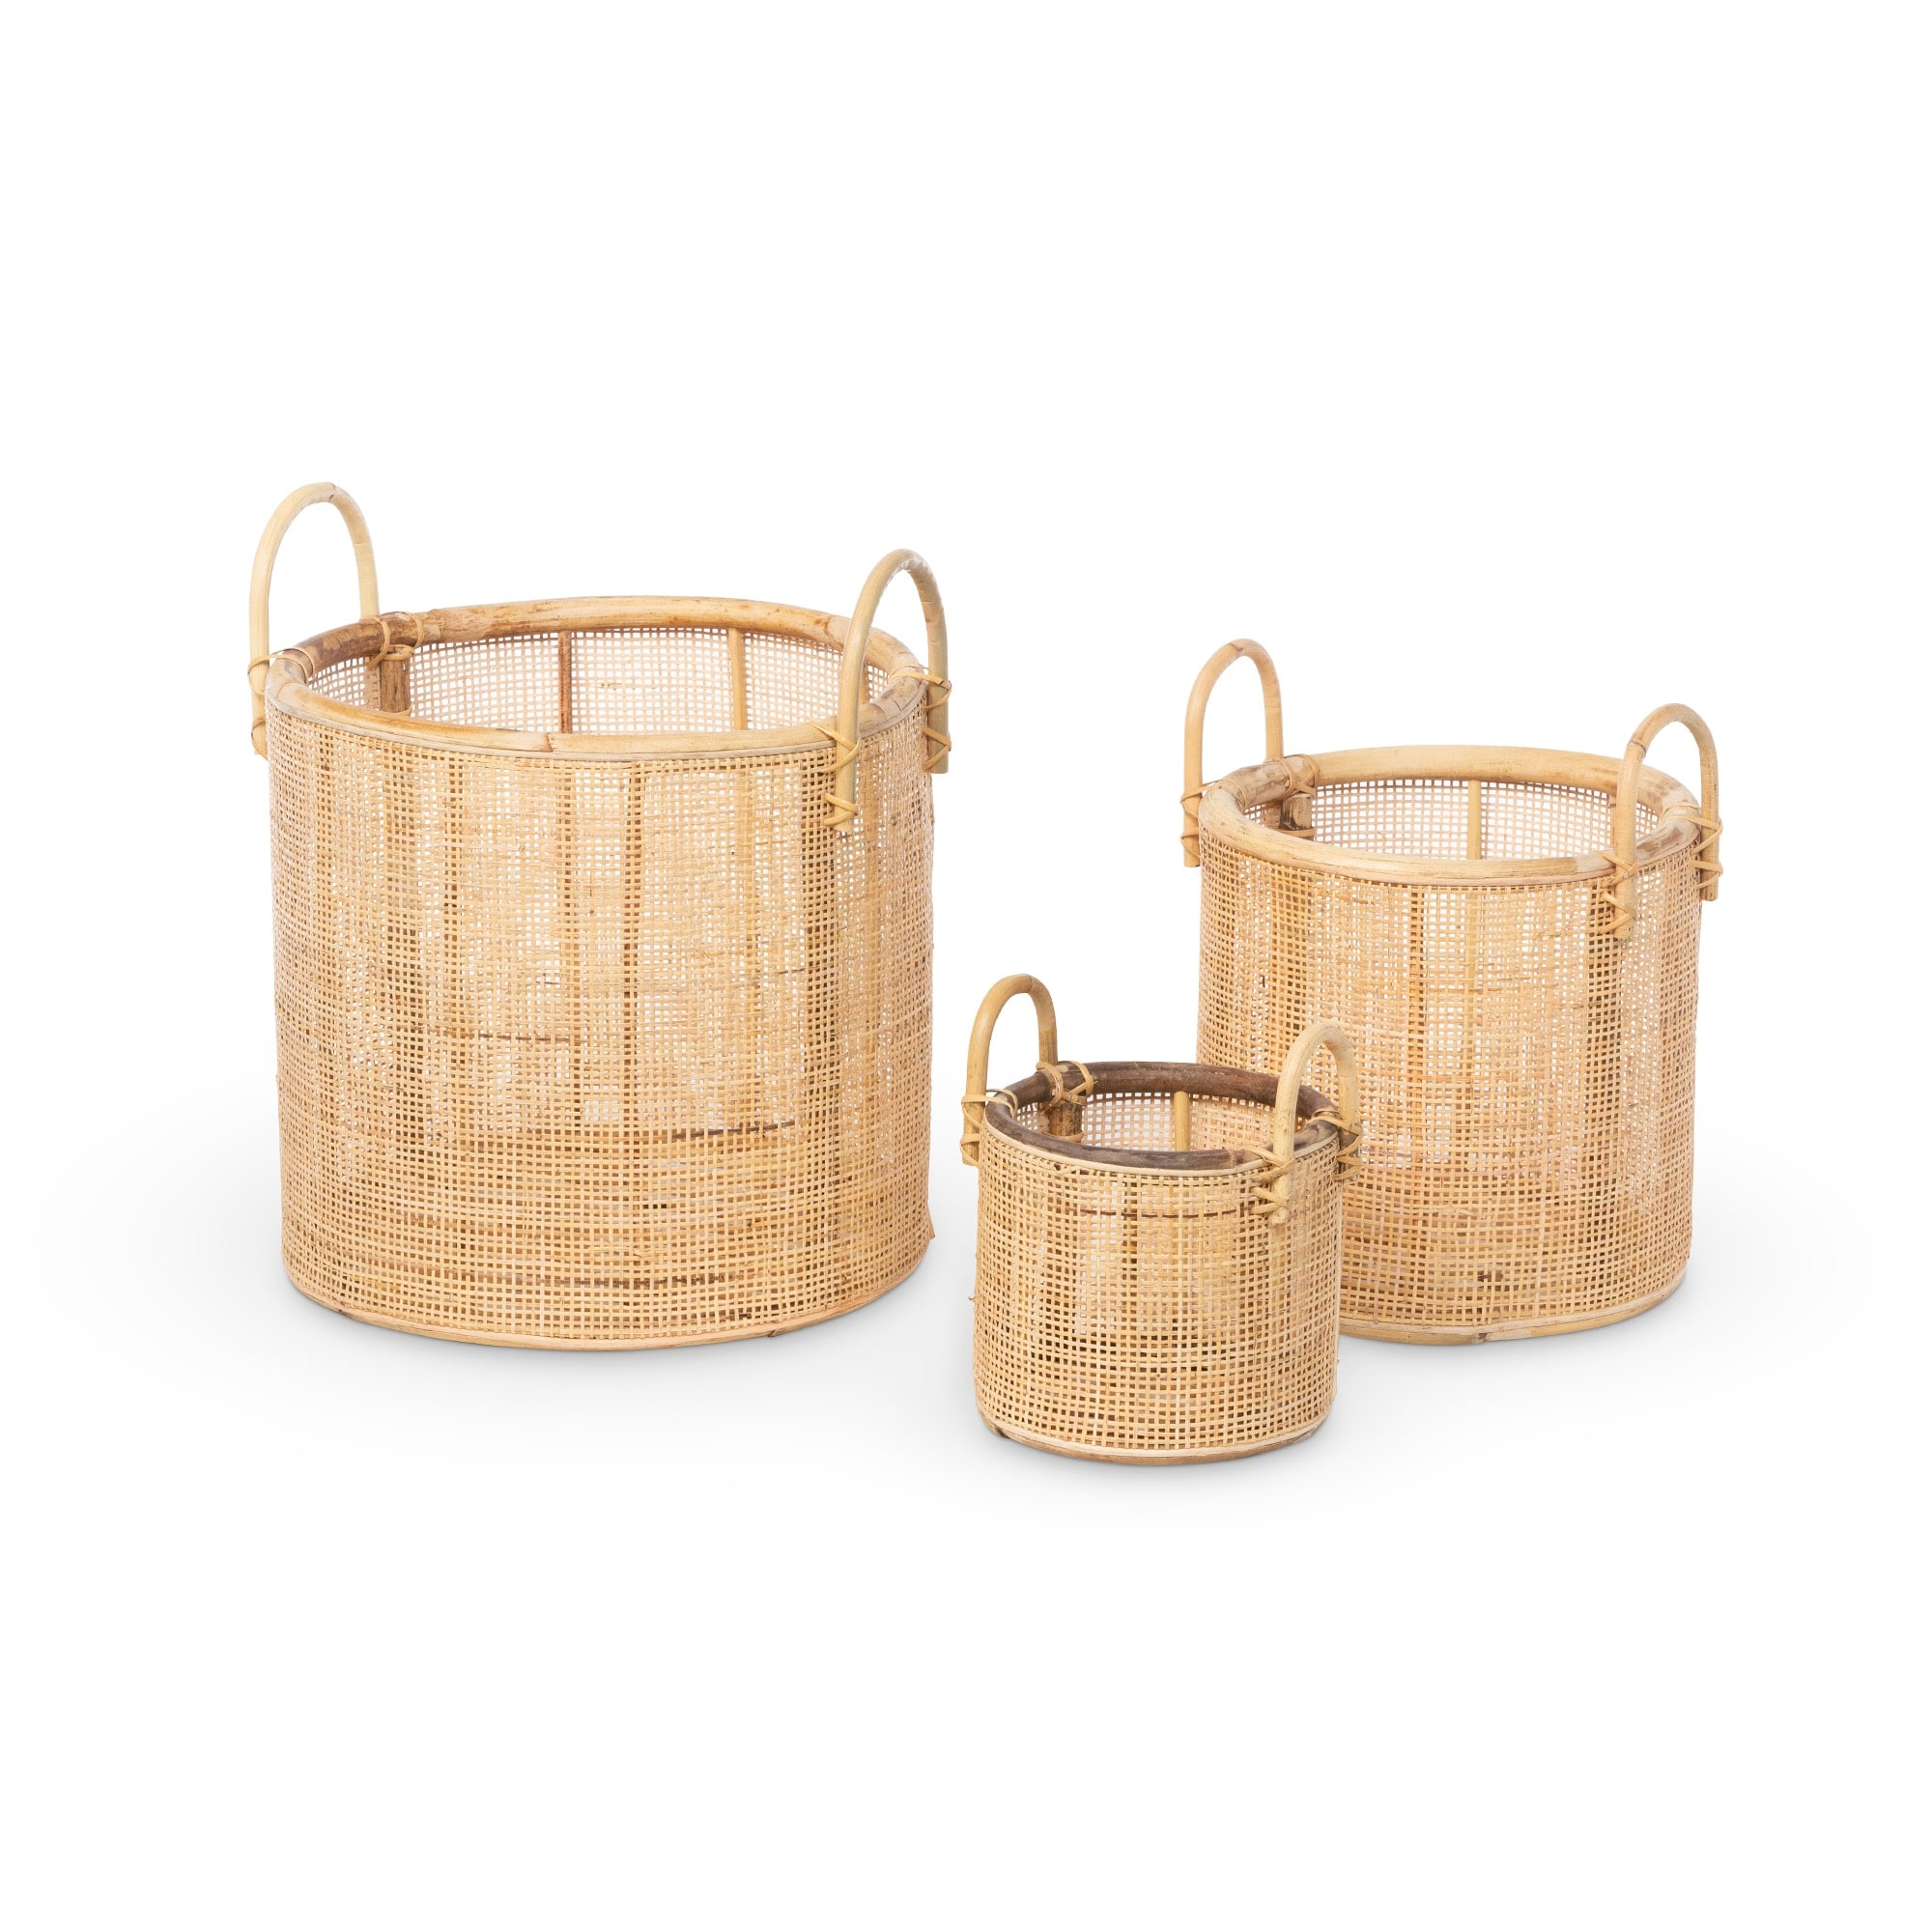 https://ak1.ostkcdn.com/images/products/is/images/direct/906268504e8f0515f661adf11b1d7a57503b4bb3/Woven-Rattan-Baskets-with-Handles%2C-Set-of-3.jpg